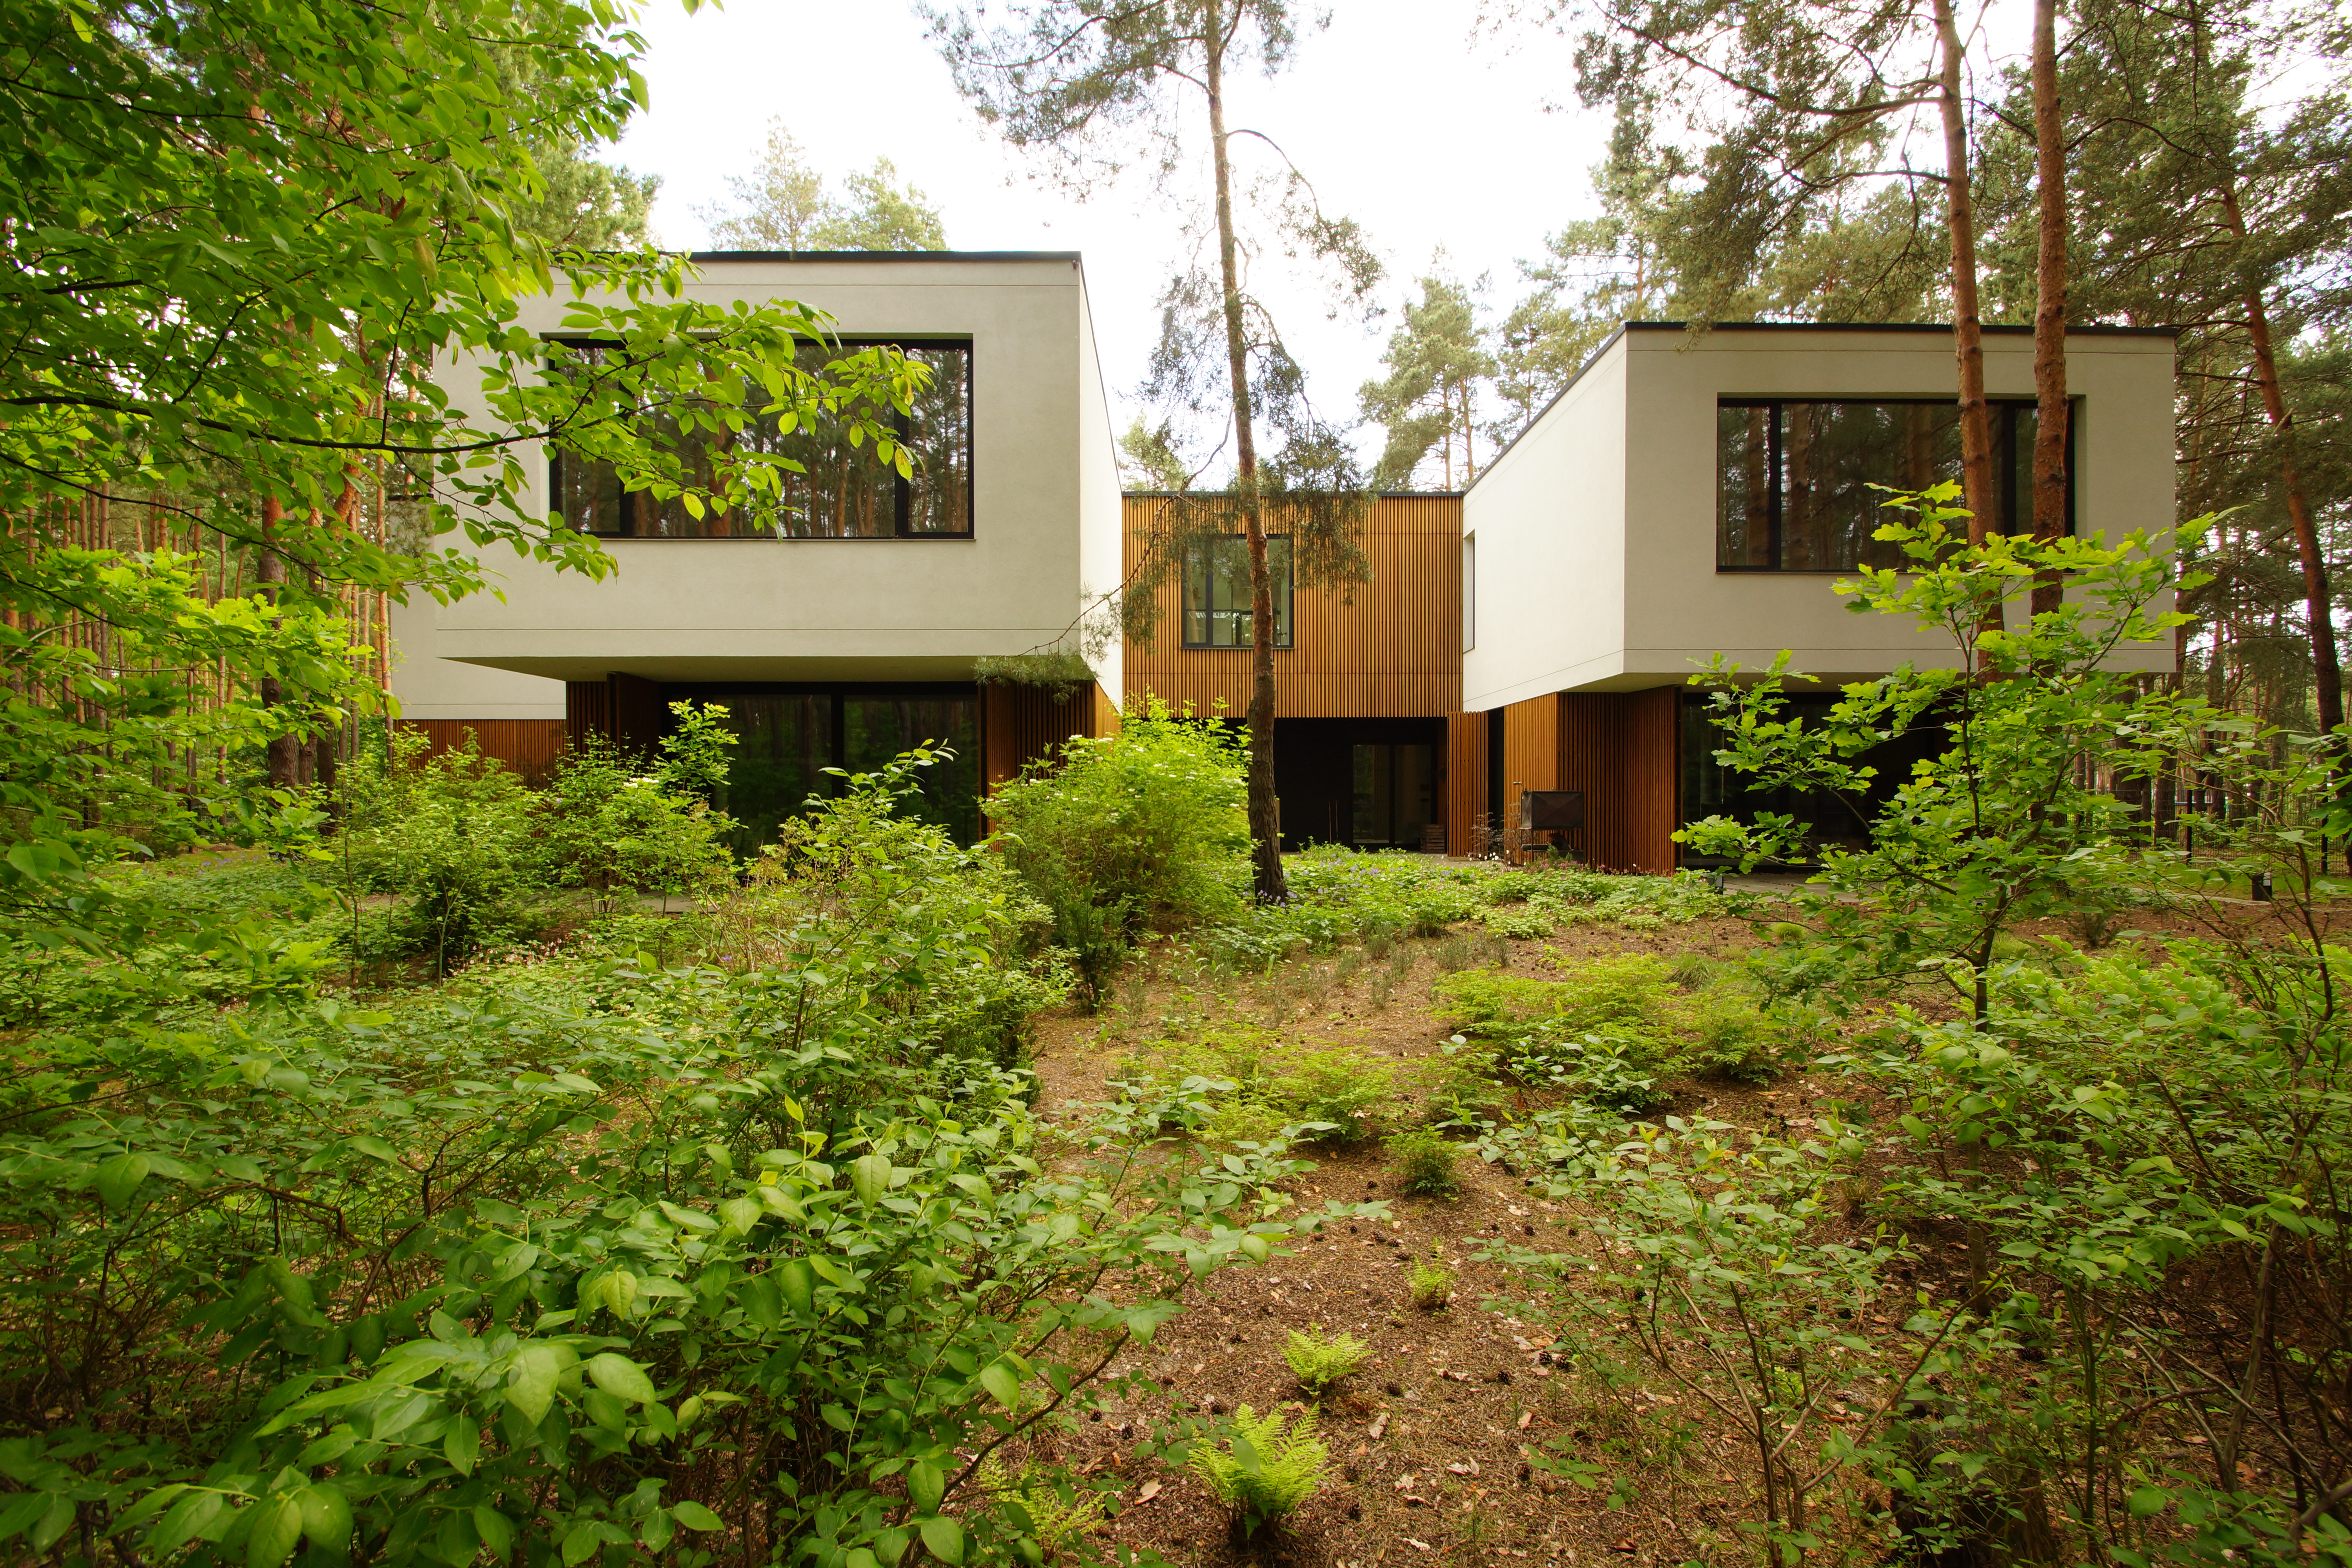 Monolithic shaped villa in the forest, Jozefow